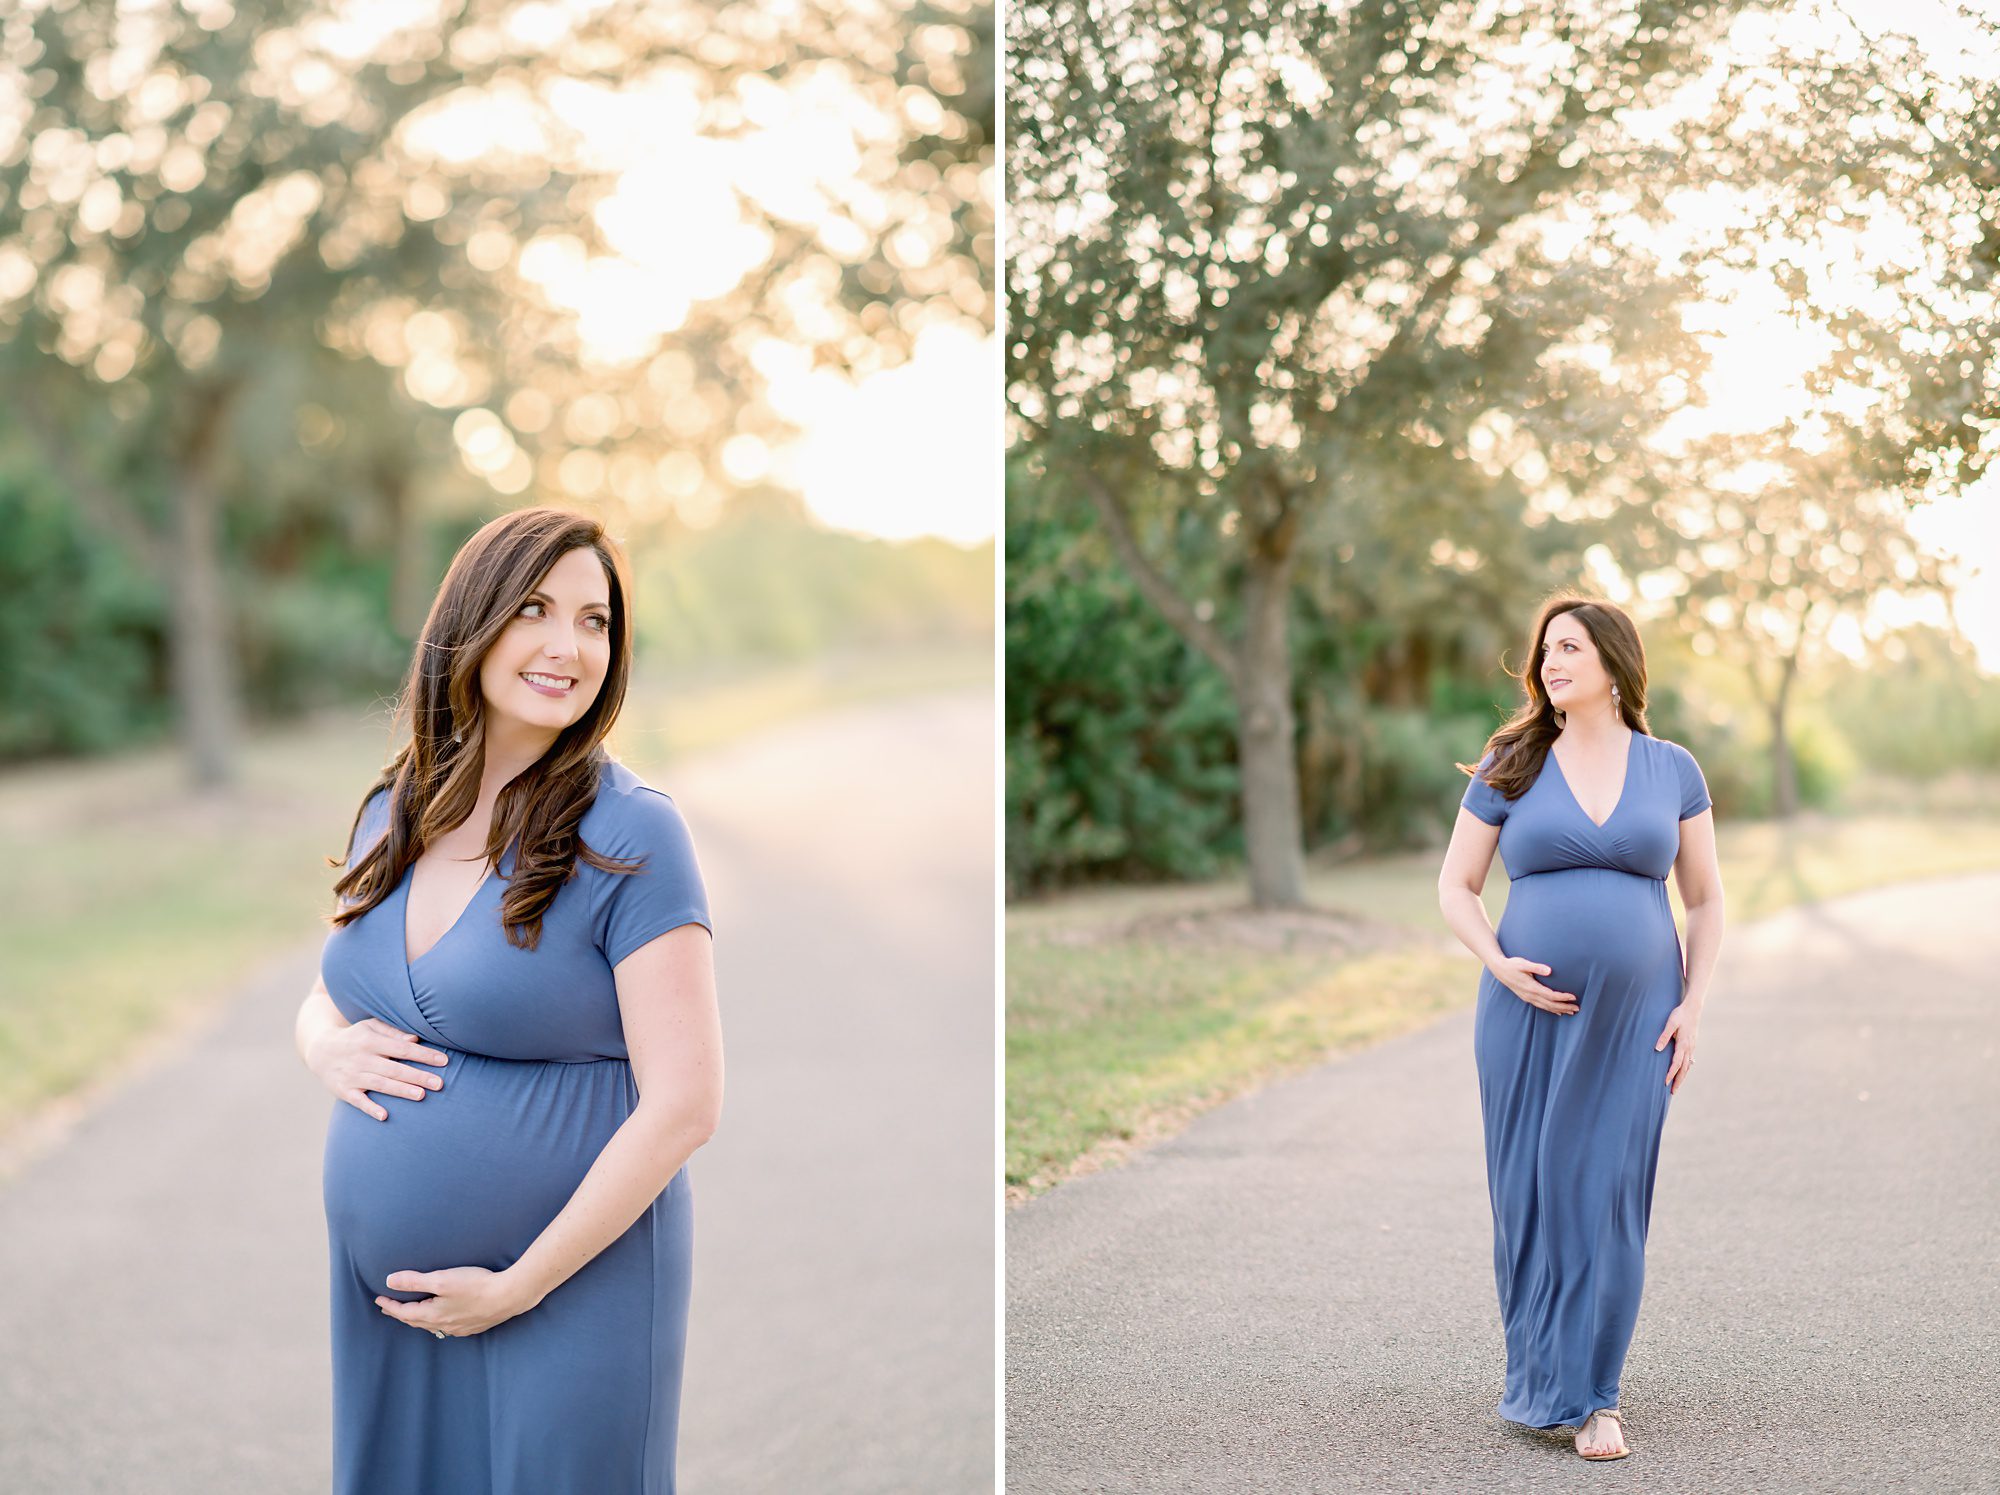 Family of 4 getting maternity portraits on a sunny tree lined pathway.